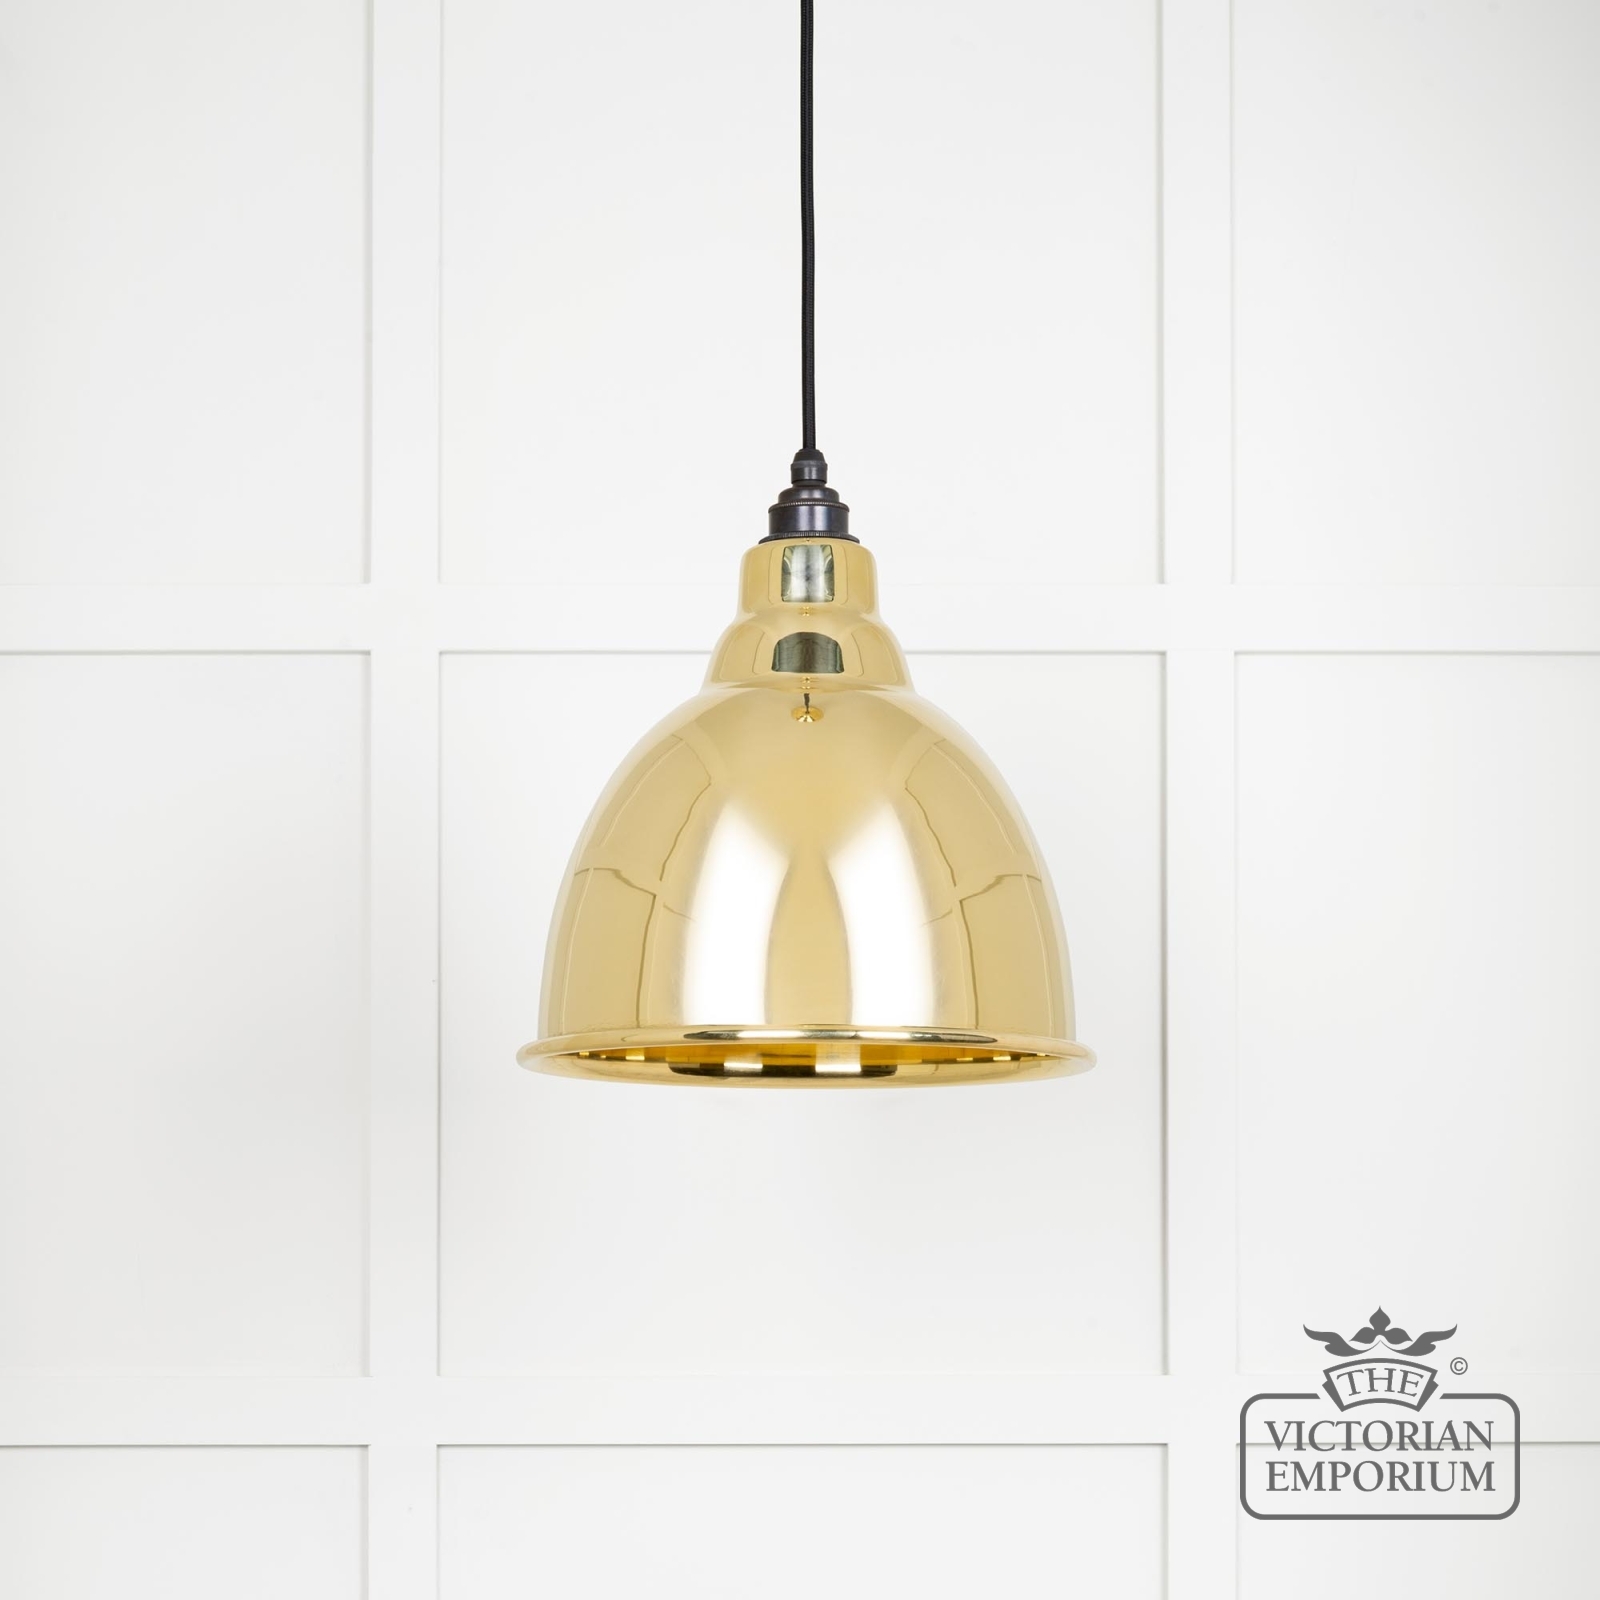 Brindle pendant light in Smooth brass finish